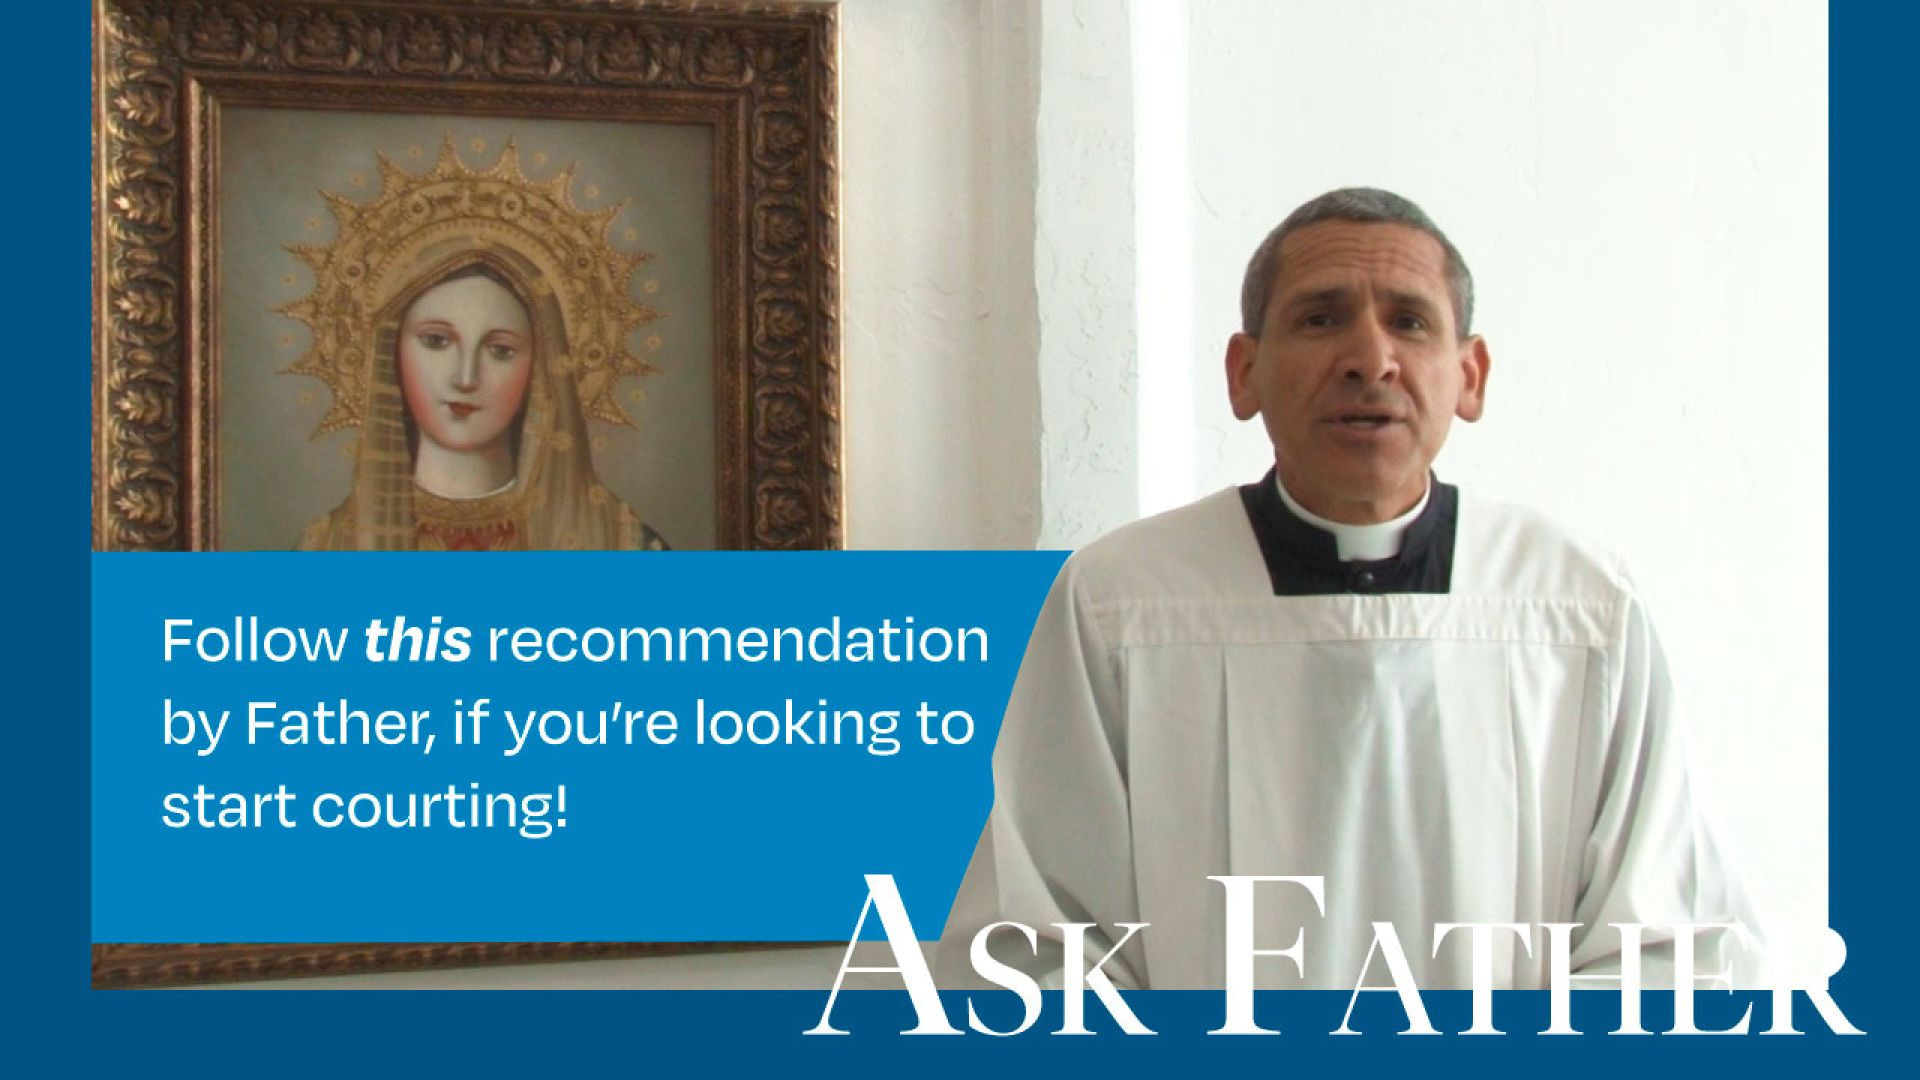 Can a Catholic Date a Non-Catholic? | Ask Father with Fr. Michael Rodríguez